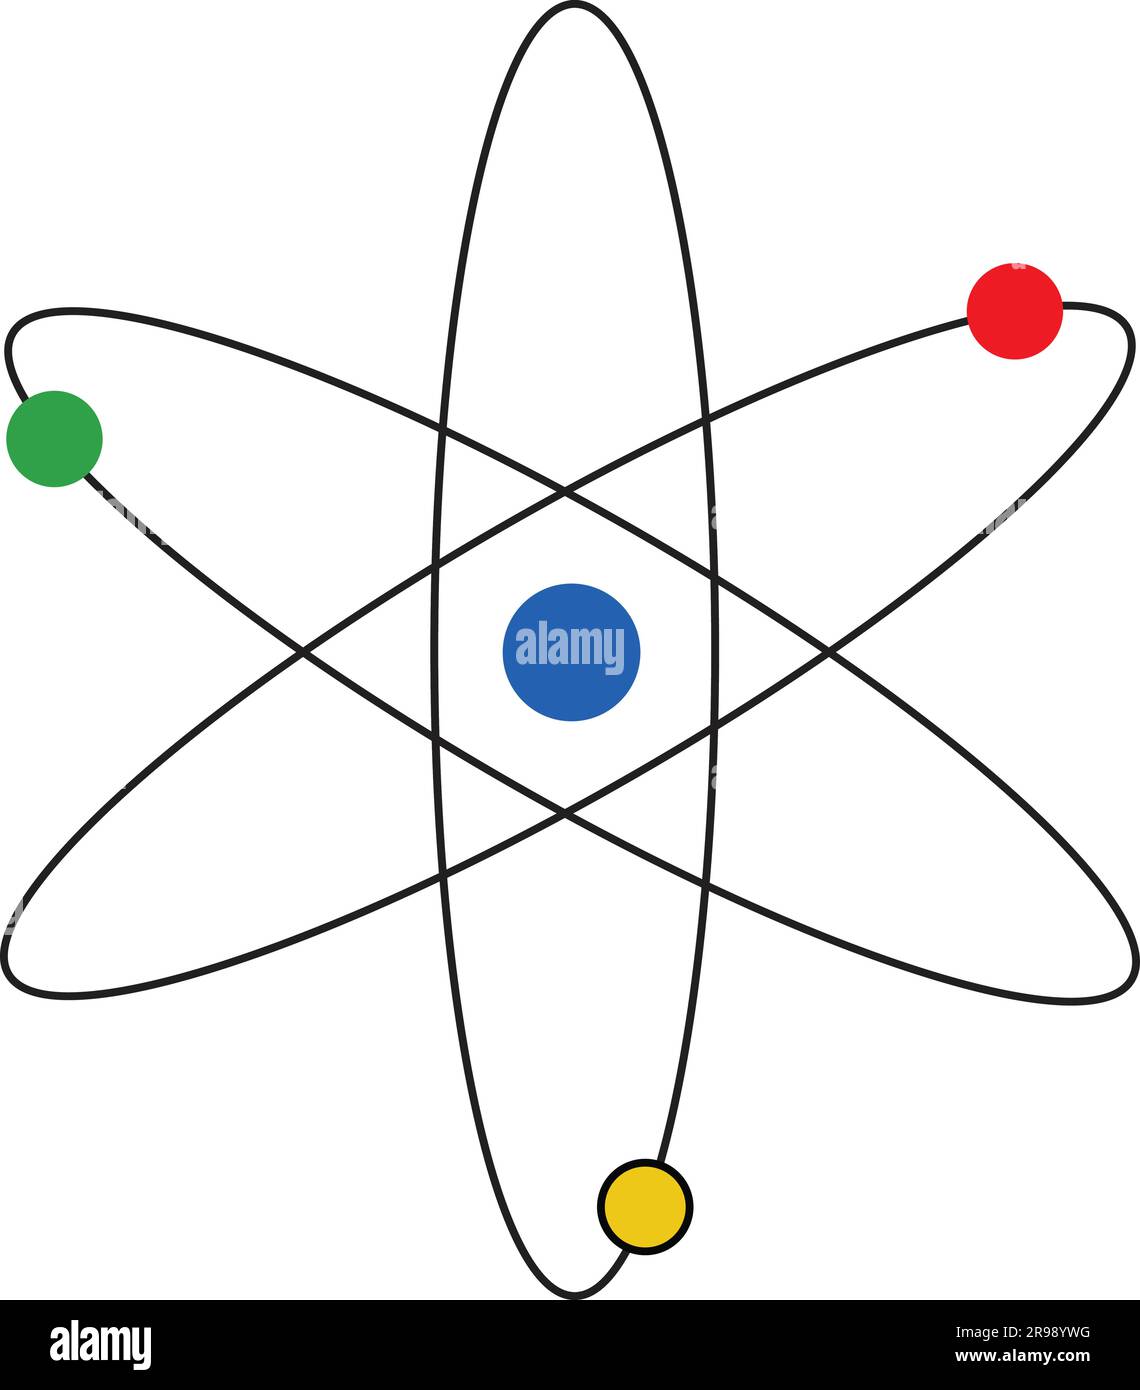 Atom vector with nucleus of protons and neutrons. Stock Vector